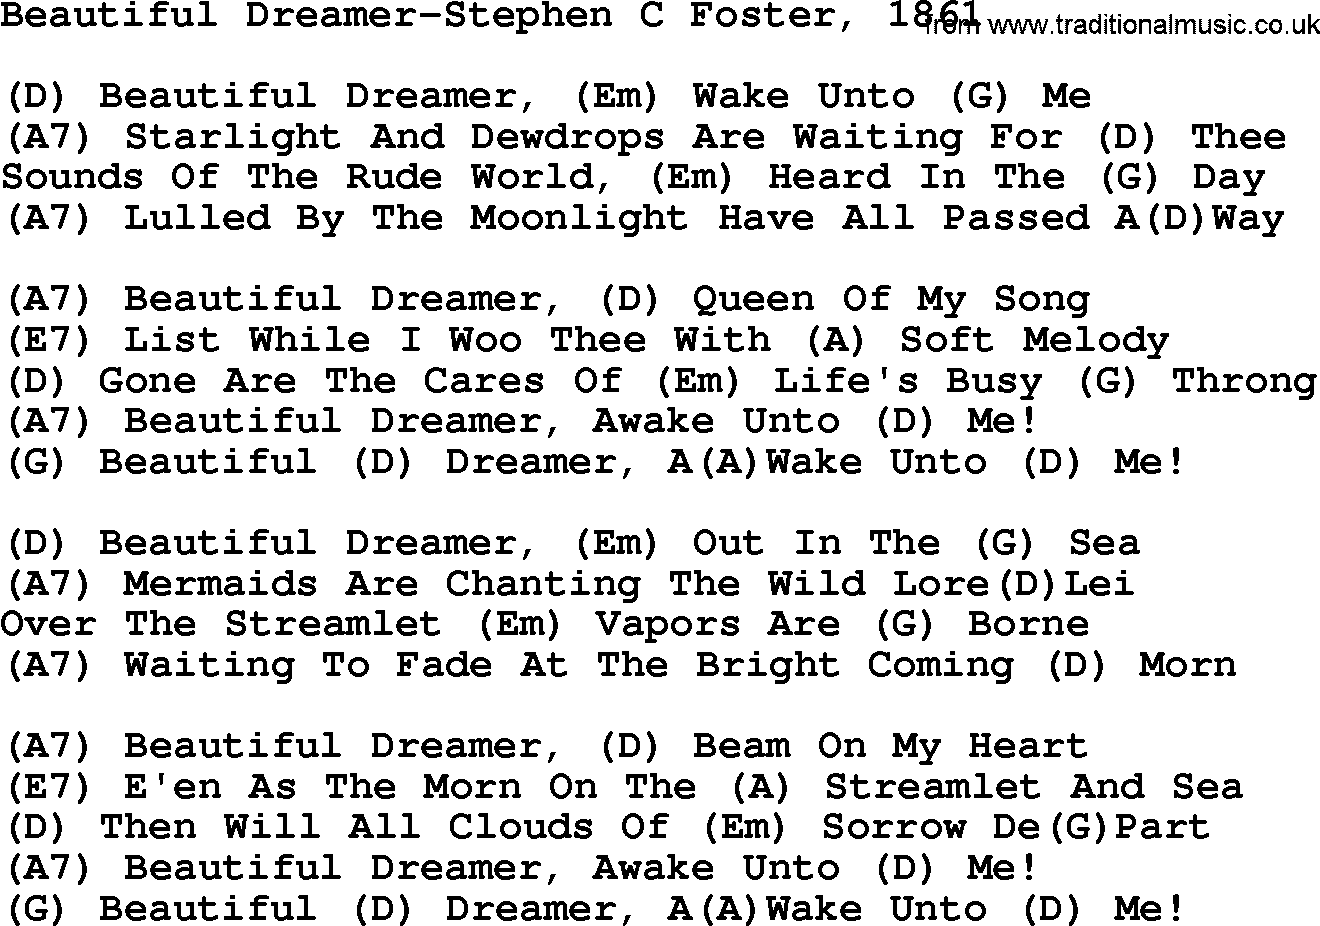 Country music song: Beautiful Dreamer-Stephen C Foster, 1861 lyrics and chords